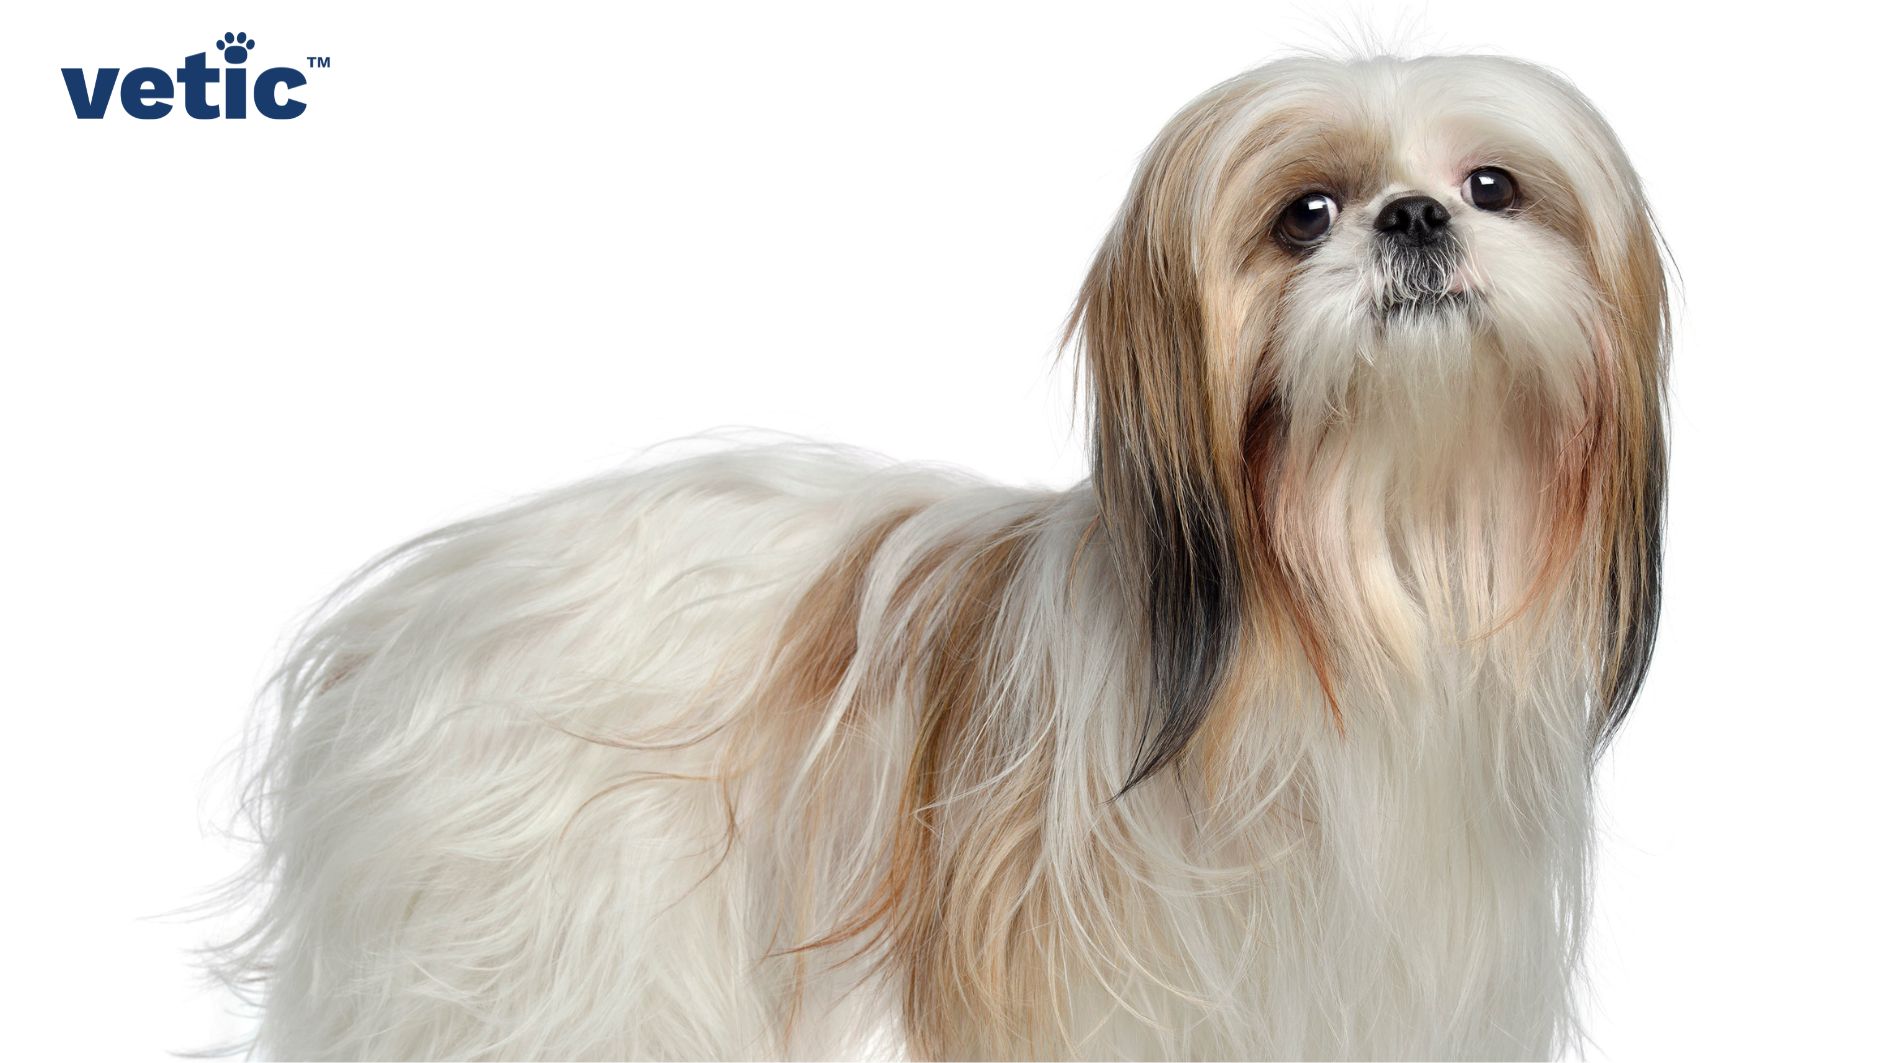 Lhasa apso is a long-haired brachycephalic breed. Small flat-faced dogs like this breed often face difficulties in breathing, and chewing